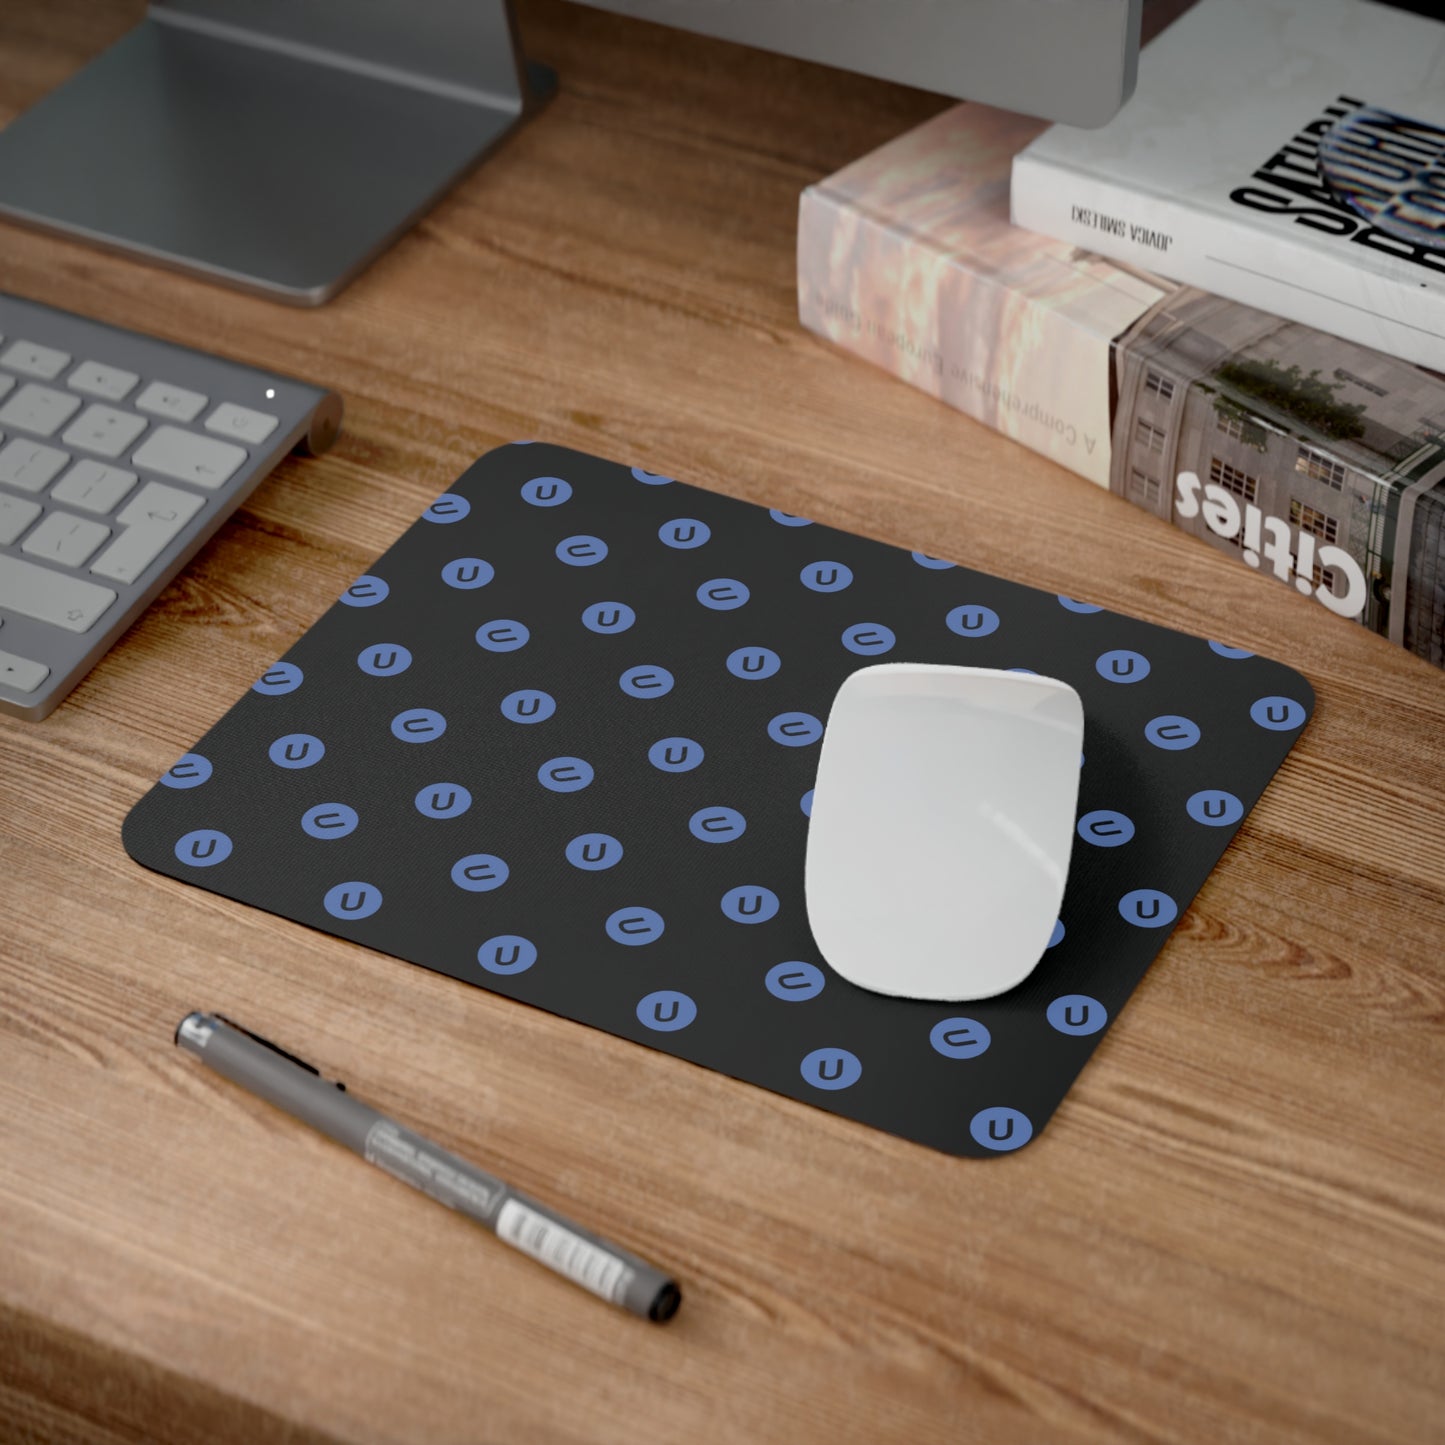 Mouse Pad UnrealIRCd Scatter Print